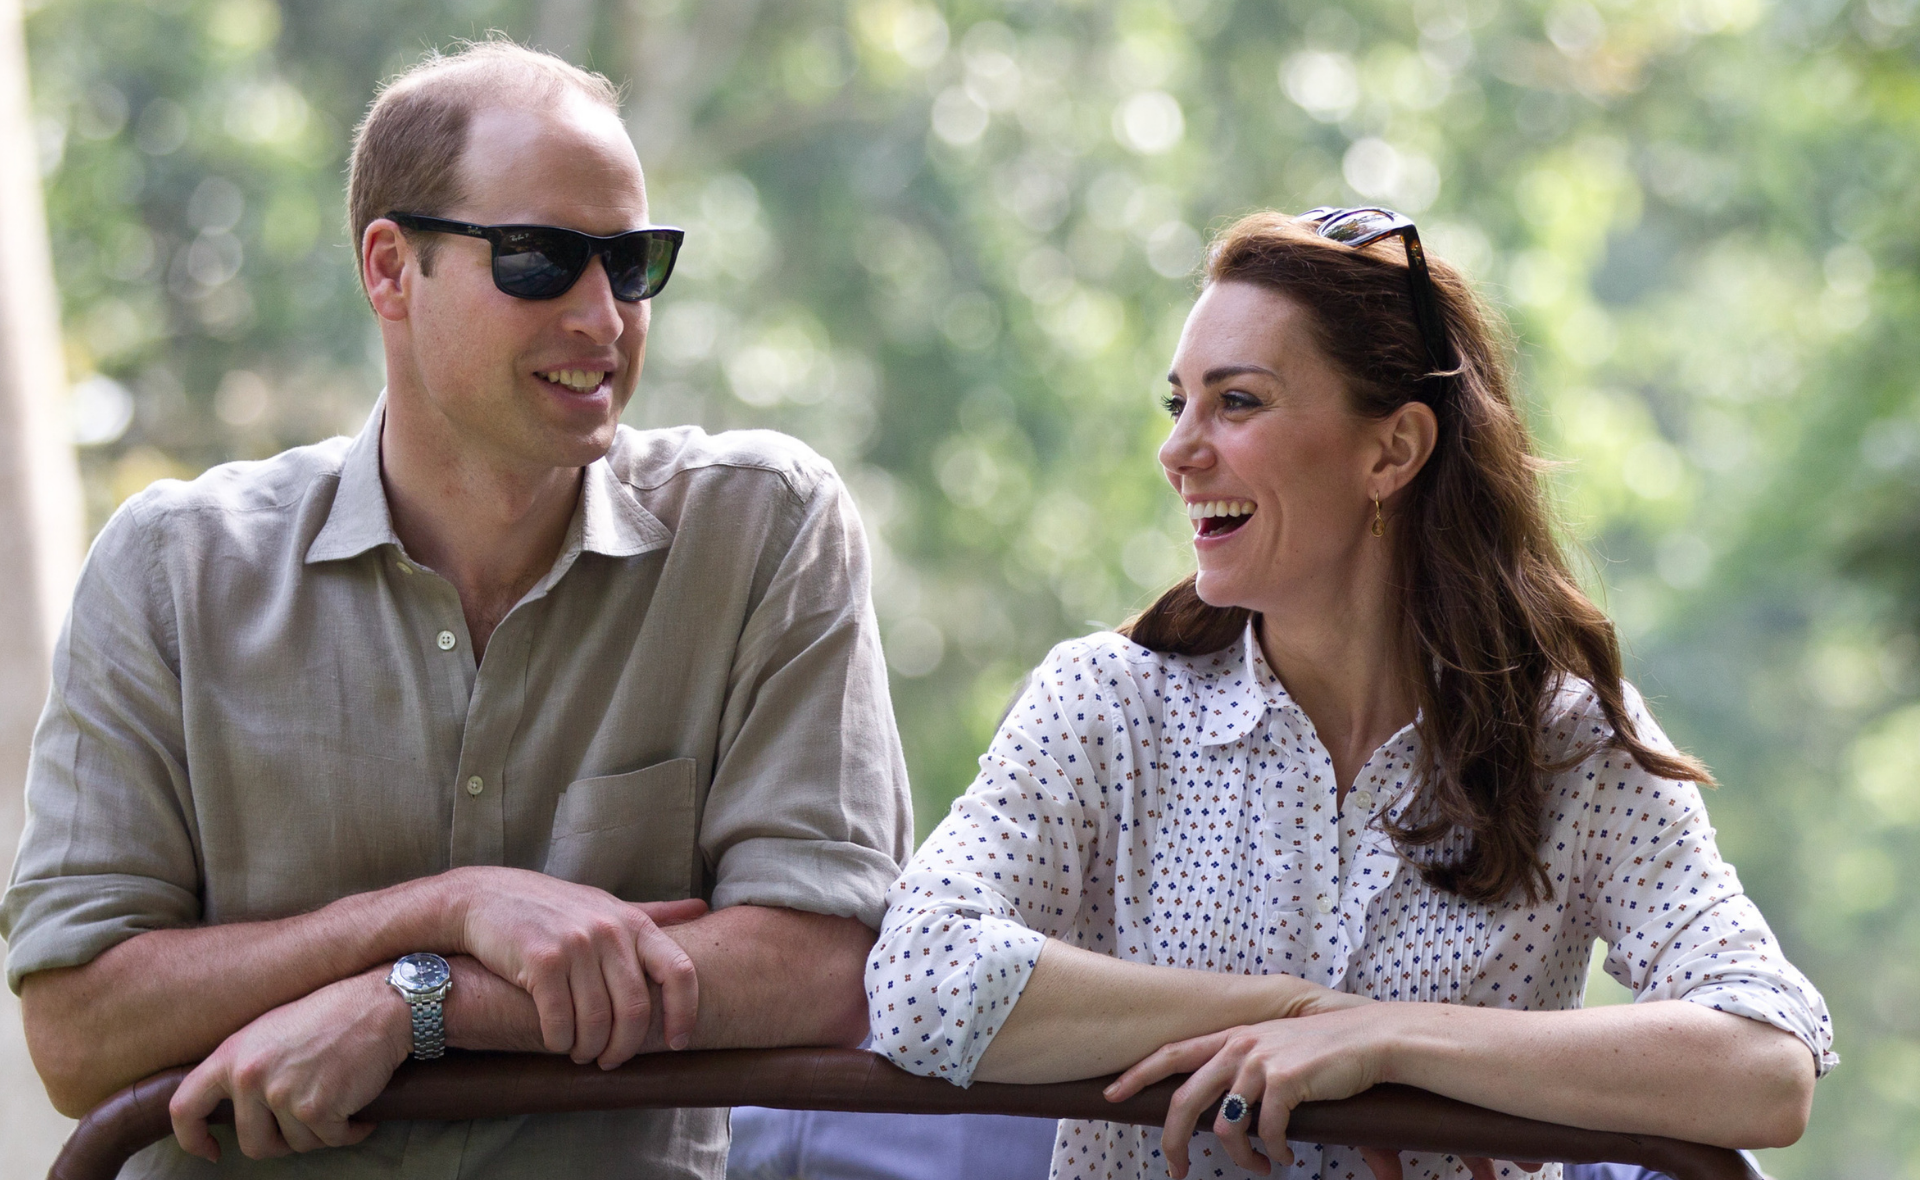 Prince William and Catherine, Duchess of Cambridge’s upcoming royal tour is more significant than you may expect